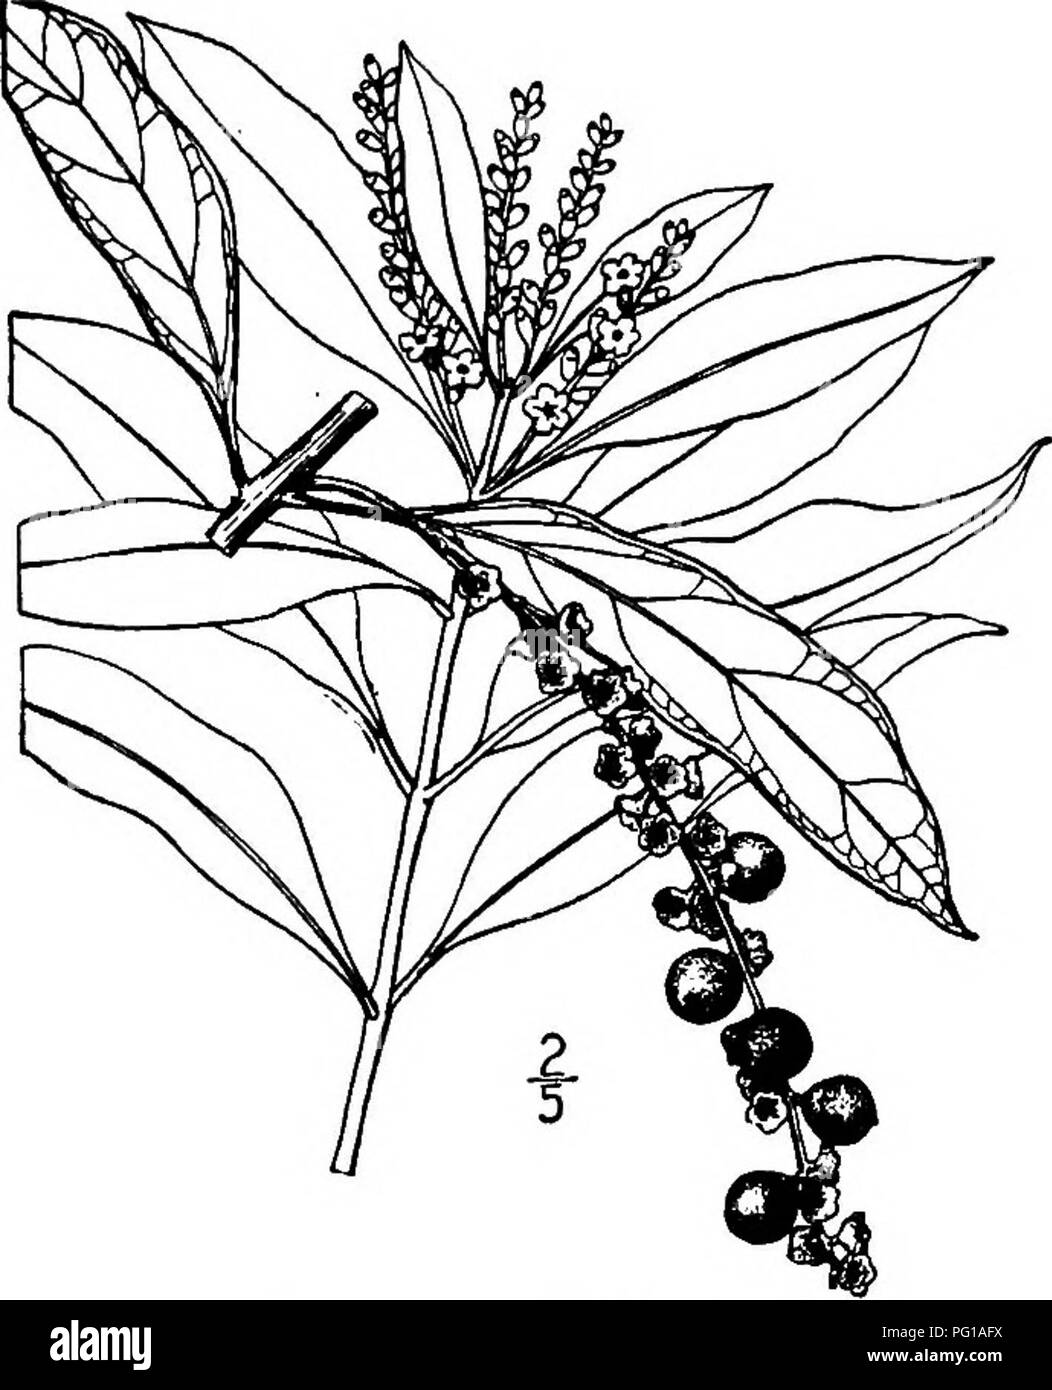 . North American trees : being descriptions and illustrations of the trees growing independently of cultivation in North America, north of Mexico and the West Indies . Trees. Black Mangrove 825. The twigs are slender, striate, yellowish and smooth or slightly hairy, becoming round and brownish gray. The leaves are thick and leathery, opposite, entire, elliptic, oblong or oblong-obovate, 5 to 15 cm. long, rounded or pointed at the apex, tapering at the base into the short, stout, grooved leaf-stalk, light green, shining and prominently veined. The flowers appear at nearly all seasons, at the en Stock Photo